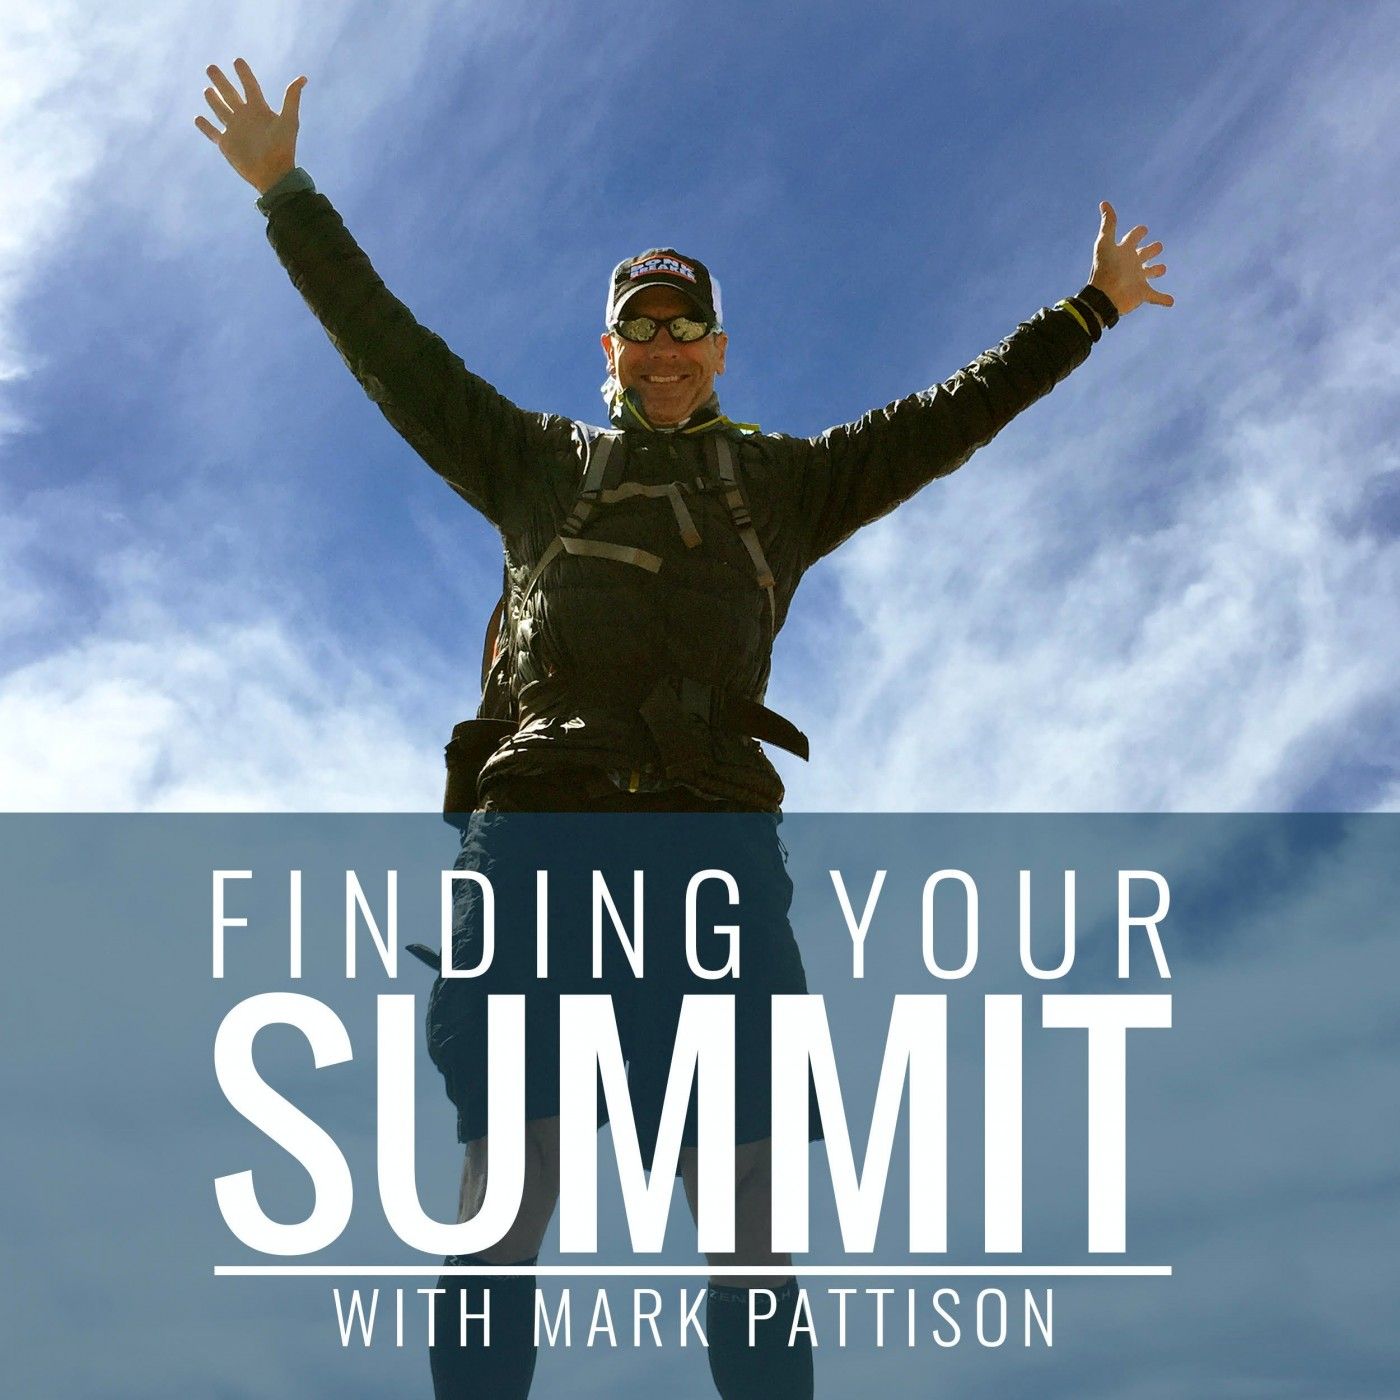 Welcome To Finding Your Summit - With Mark Pattison